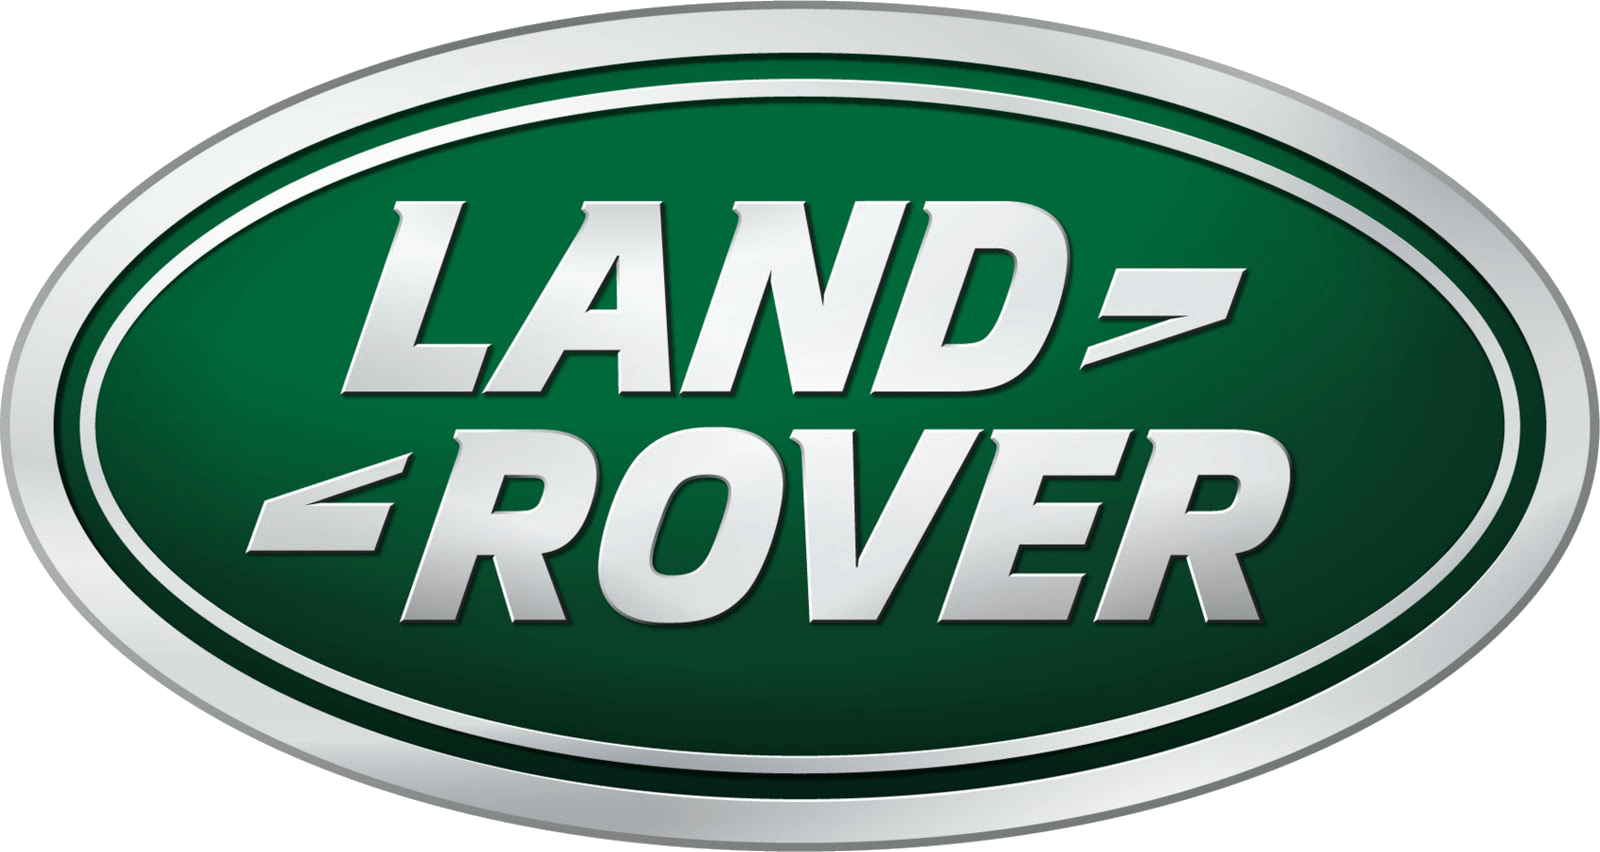 What Has a Green Oval Logo - Land Rover Logo, Land Rover Car Symbol Meaning and History | Car ...